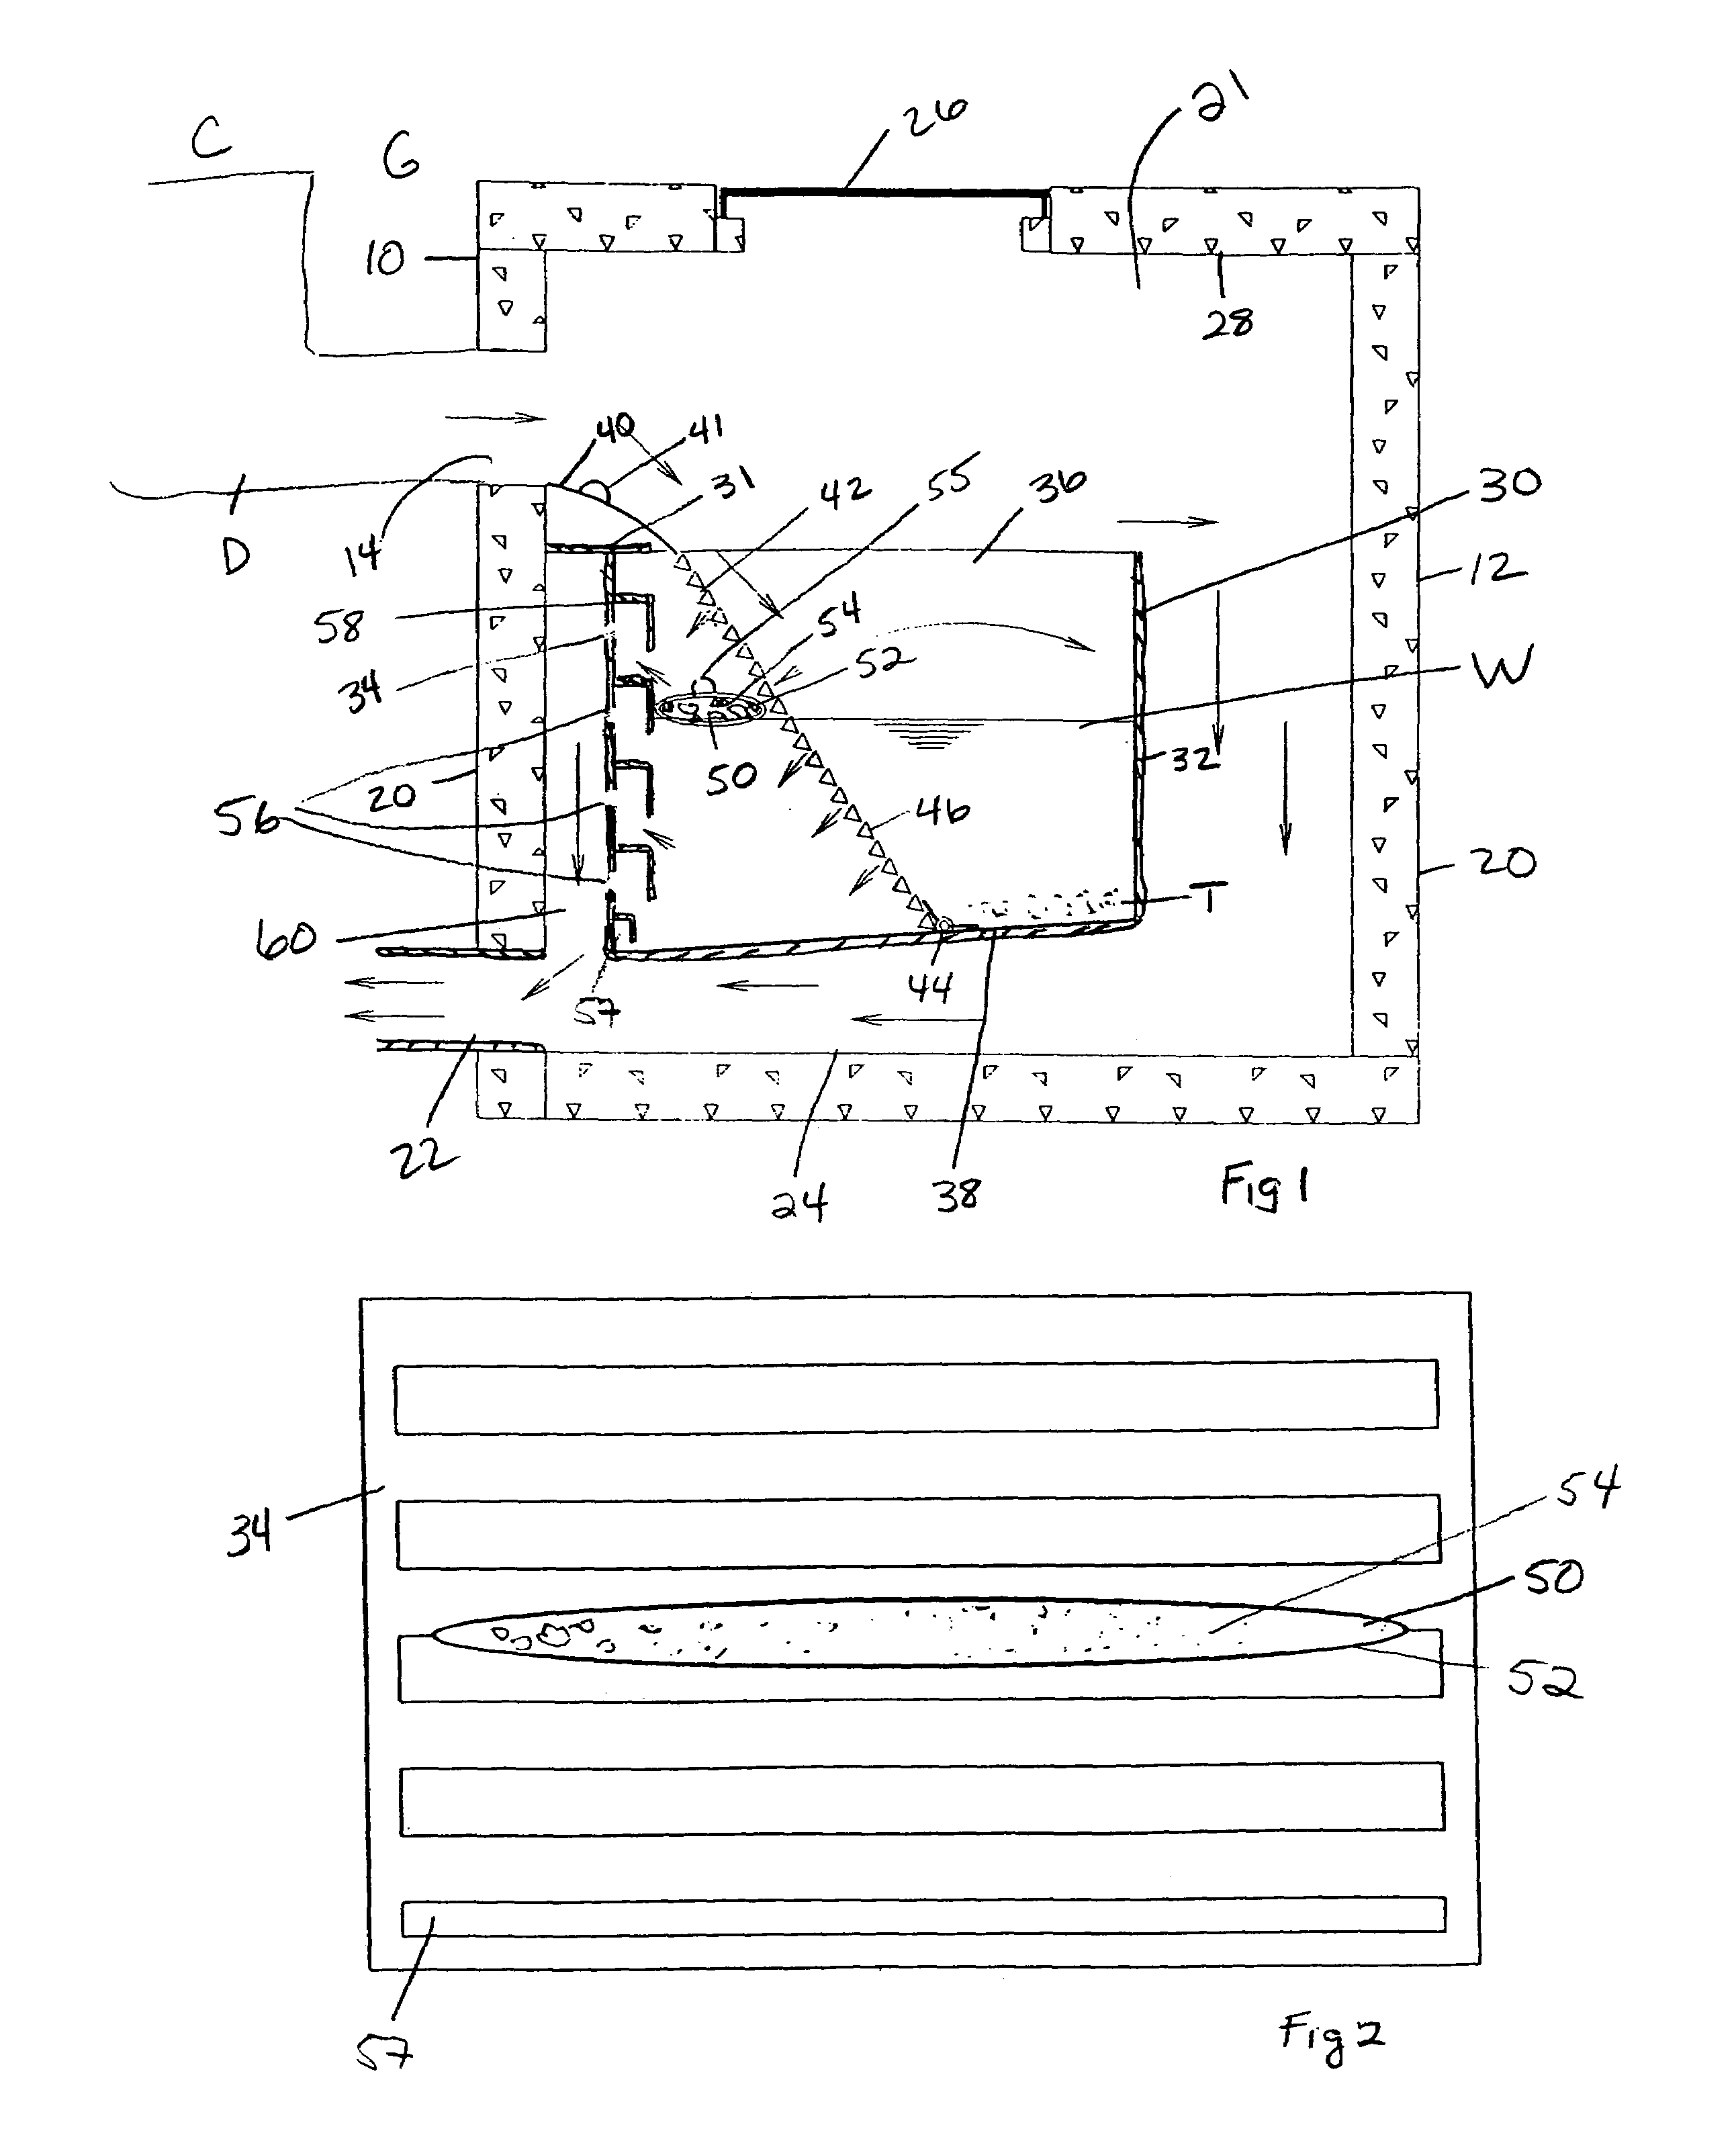 Apparatus for separating oil and debris from water run-off